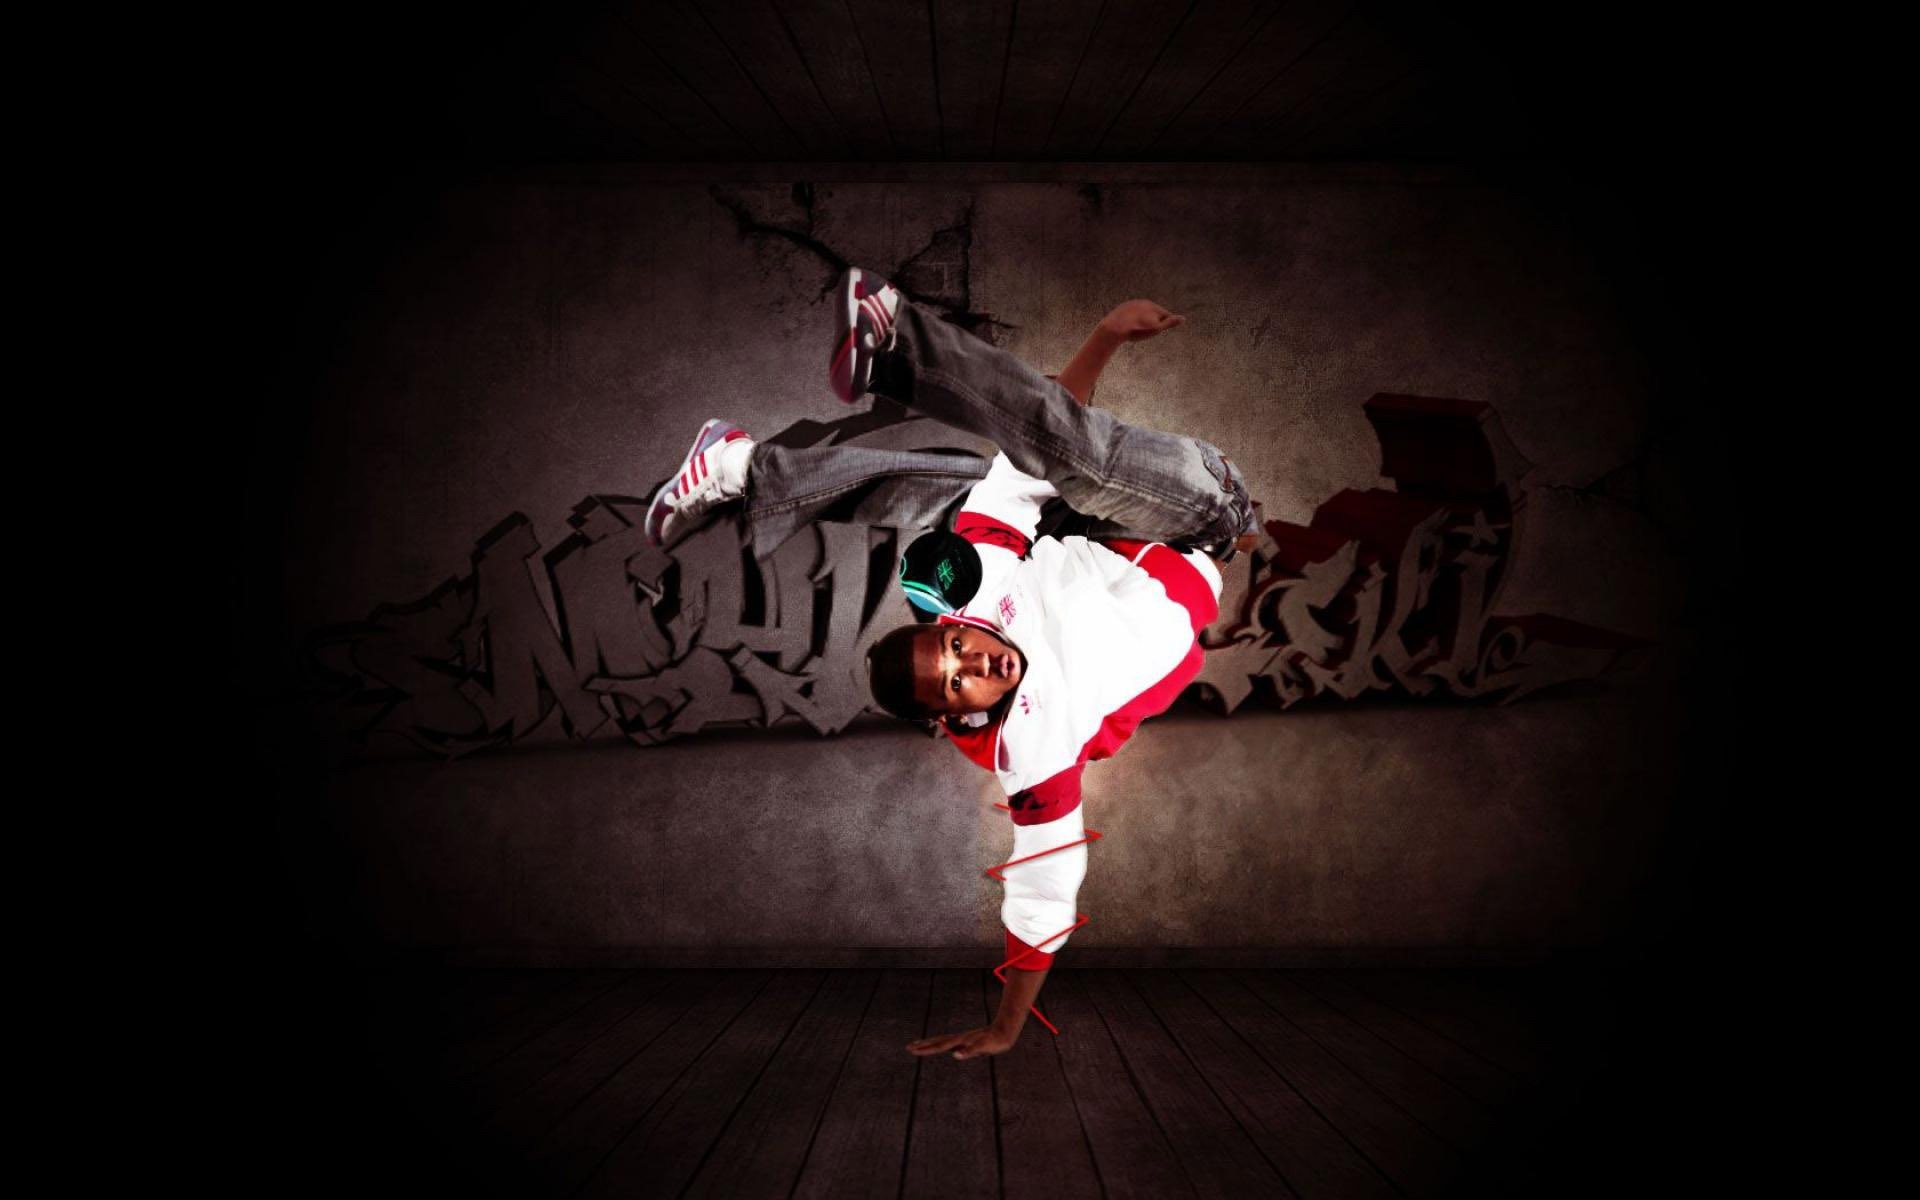 Street Dance: Breakdance, Hip hop, Urban, A style that improvisational and social in nature. 1920x1200 HD Background.